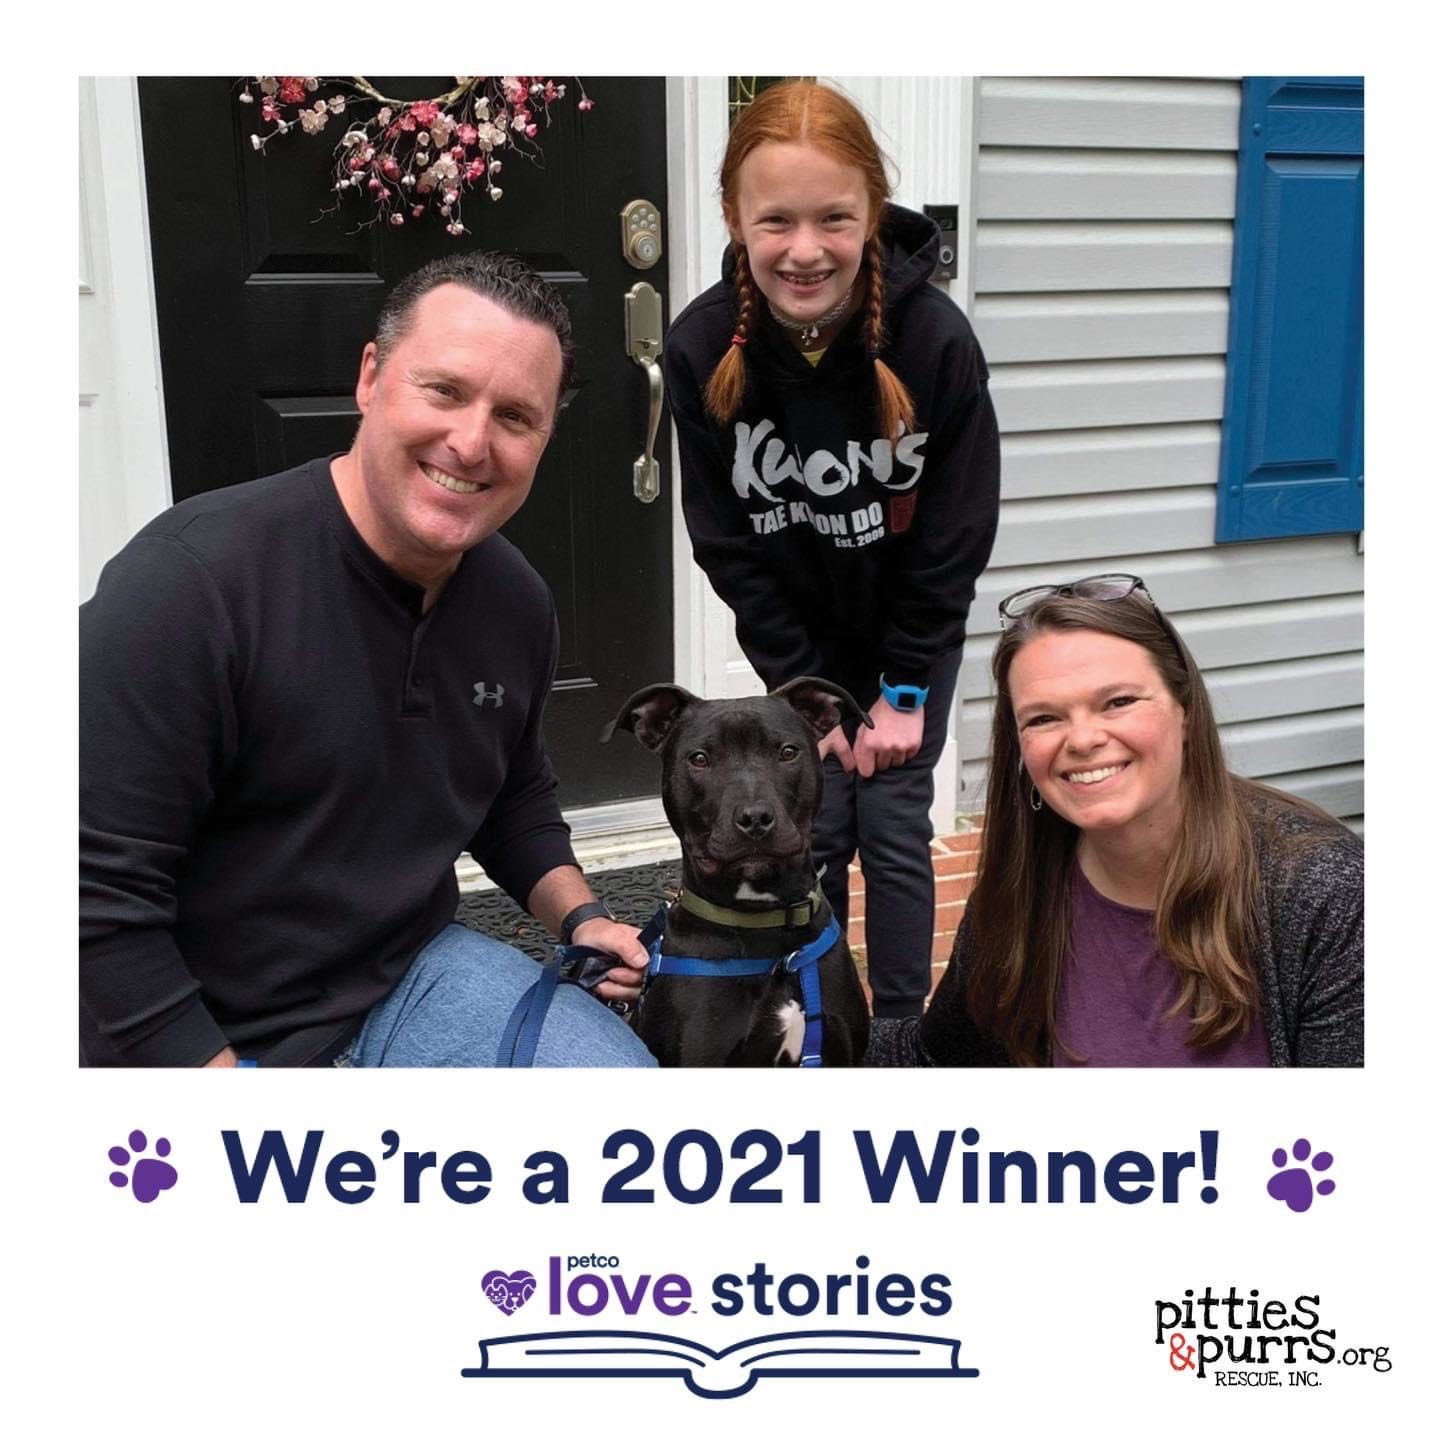 Rob, Cara and Julie Newman were recognized for their Petco Love Story after adopting a pit bull named Zeke.